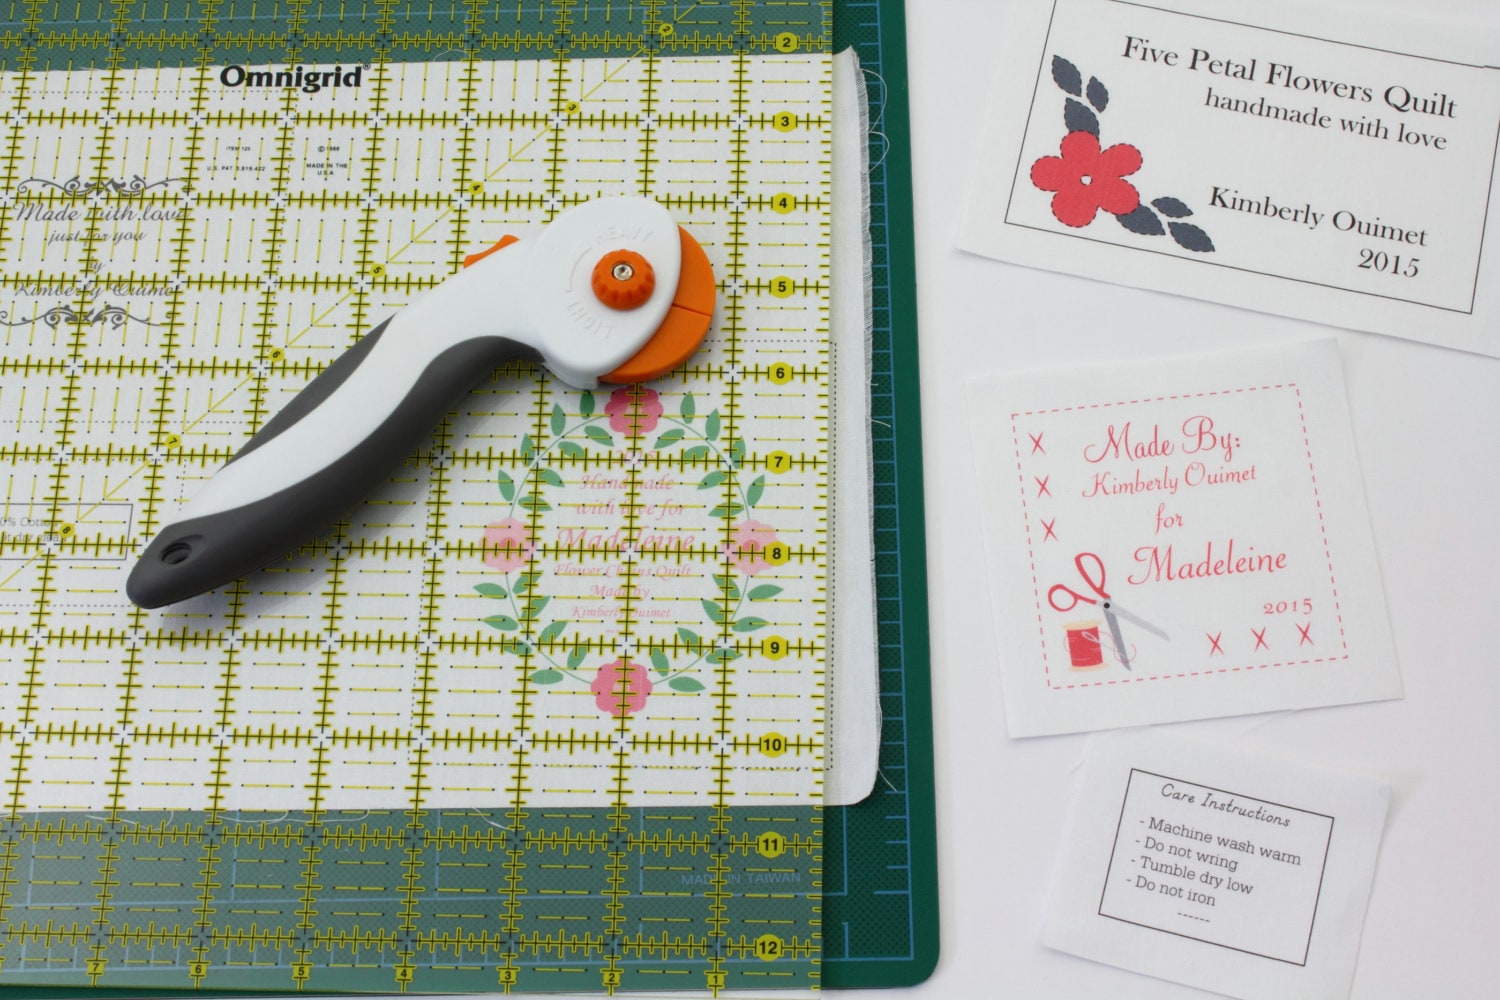 All about quilt labels: 5 methods for labeling your quilts — Lee